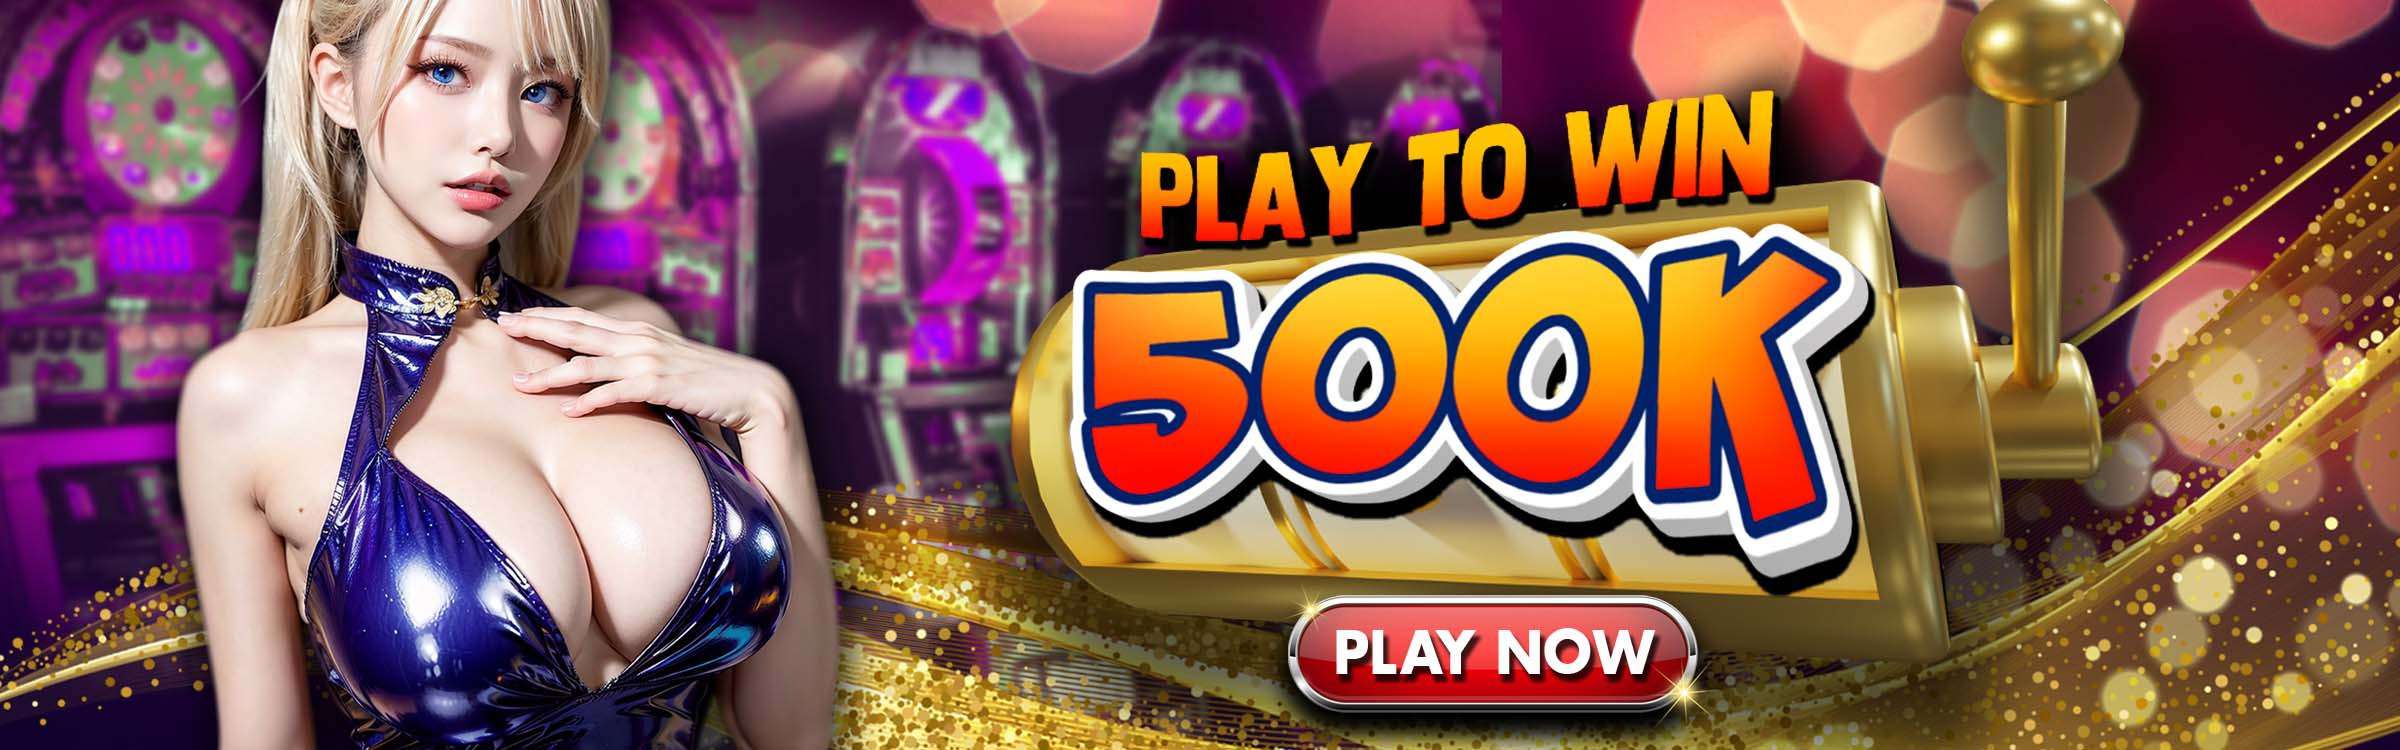 PLAY TO WIN UP TO 500K